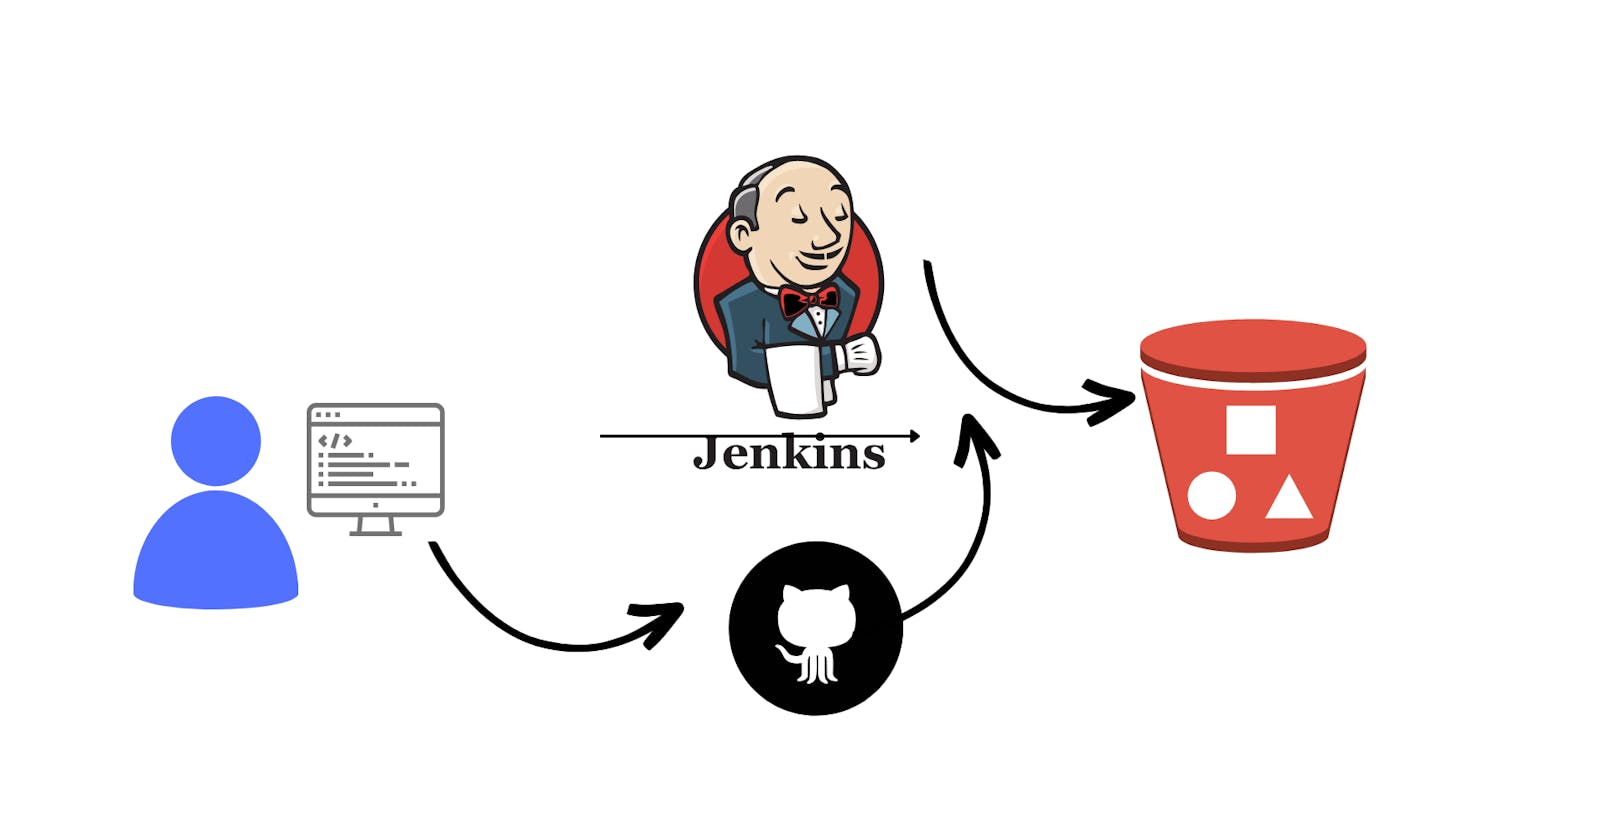 To host a static website on aws and implement using ci/cd pipeline ( jenkins )